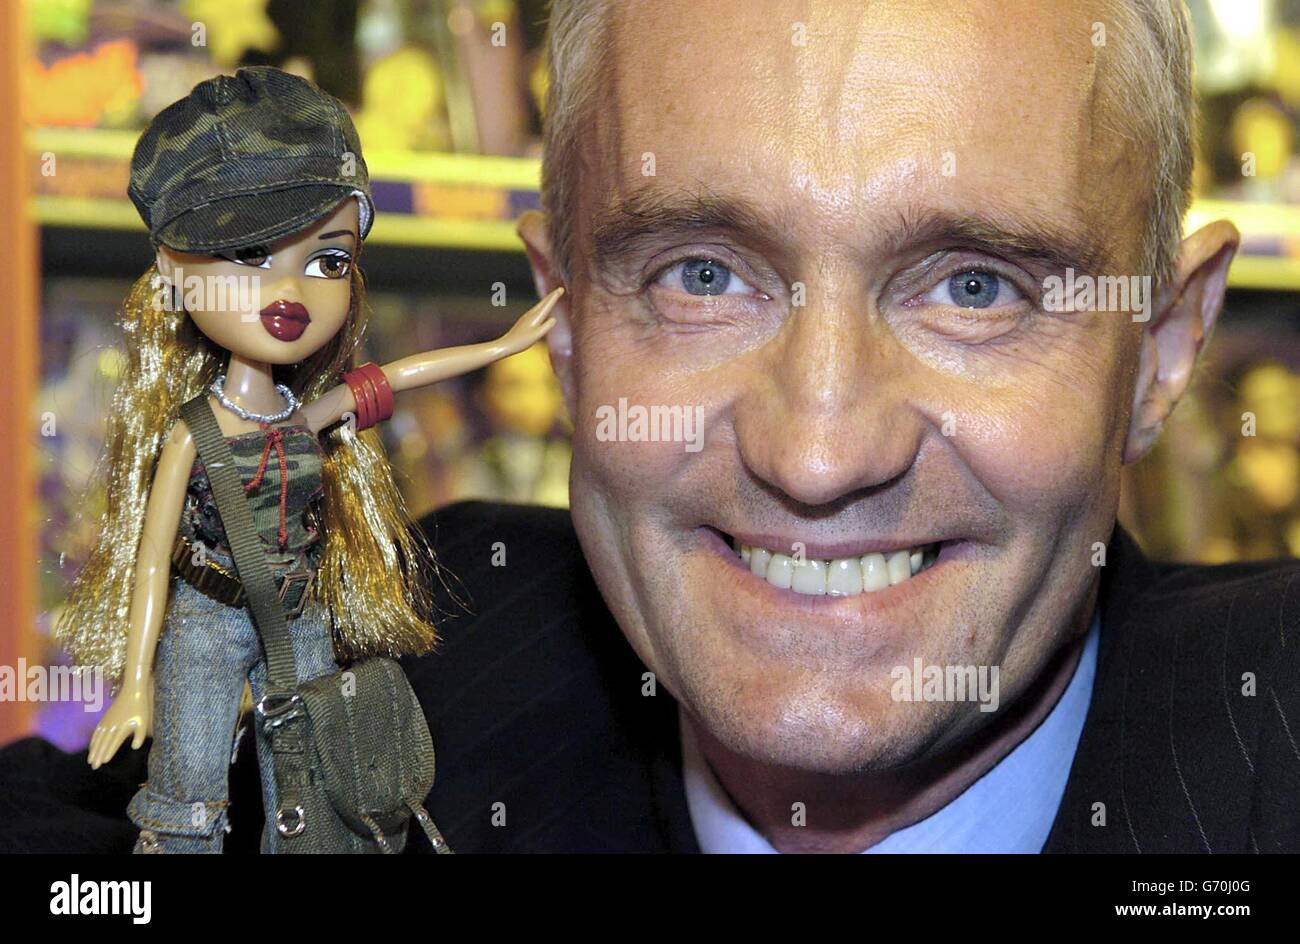 The opening of the new Bratz Shop in Londons Hamleys. Chief executive of Vivid Imaginations Mr Nick Austin holds a Bratz wildlife safari doll, a revolutionary new doll range. 9/9/04: Barbie has been toppled from her long-standing position as the UK's best-selling fashion doll, according to industry figures confirmed. The crown has been passed to Bratz dolls, which were only launched in the UK three years ago. It is the first time Barbie had dropped from the top spot since data was first collected 10 years ago. Stock Photo